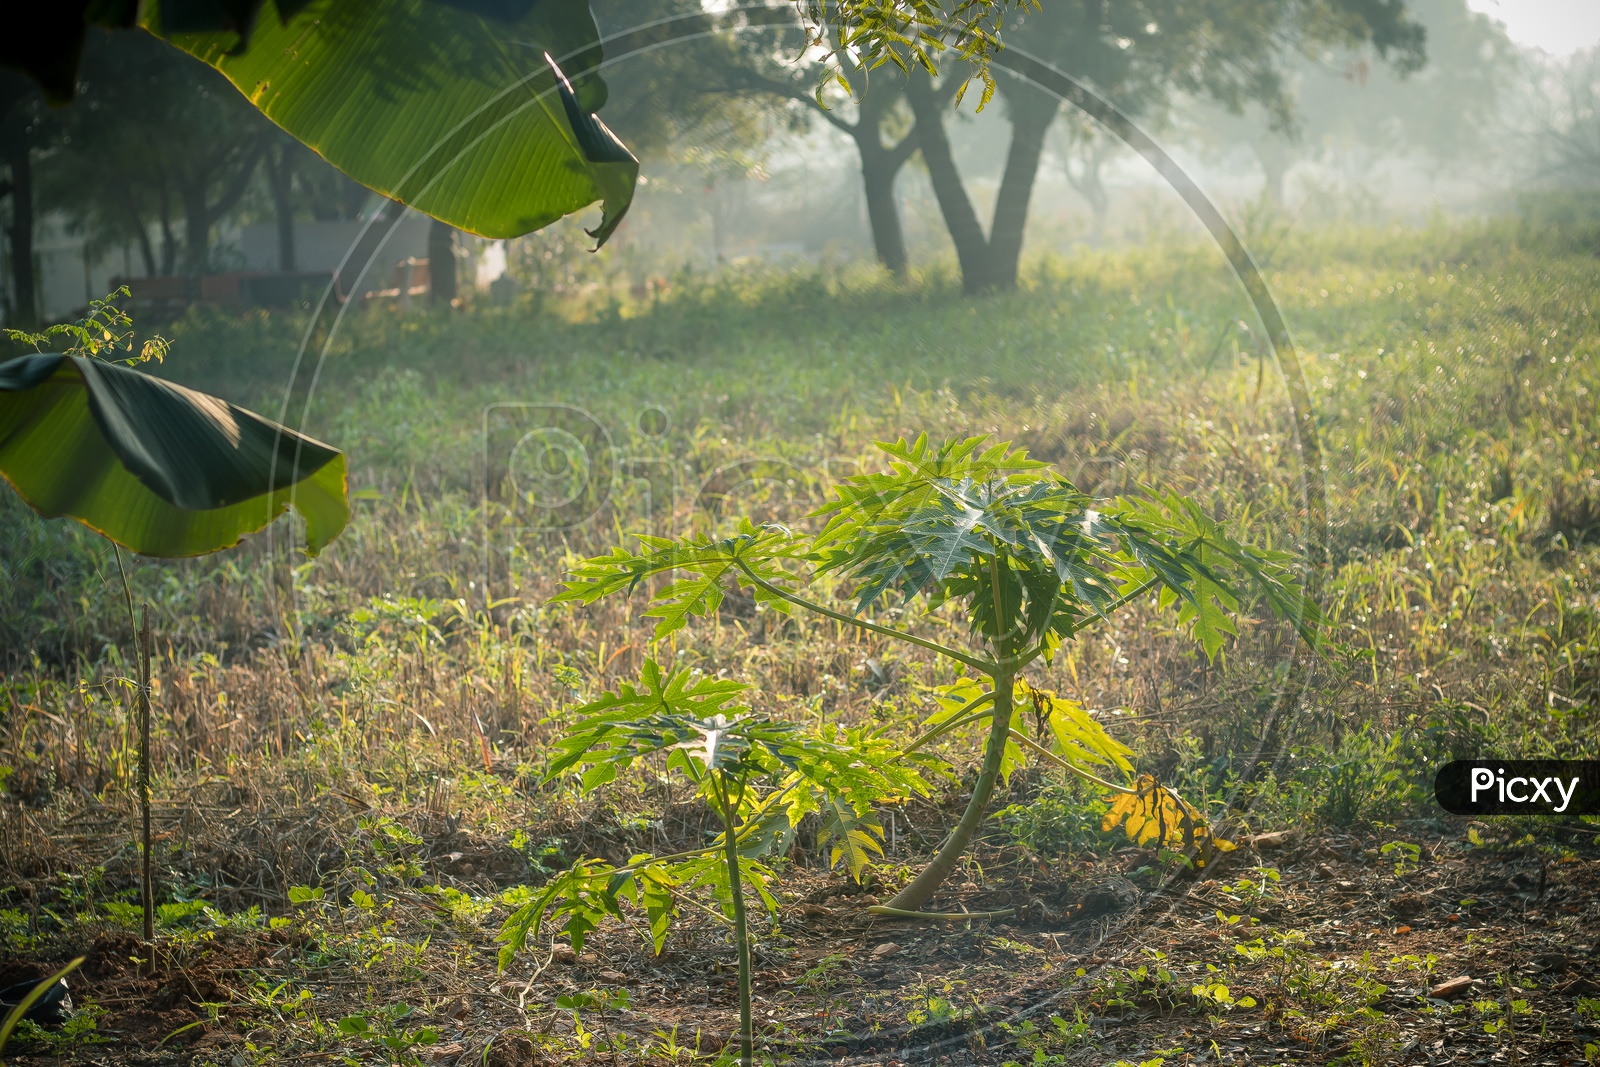 papaya tree in the field with grass